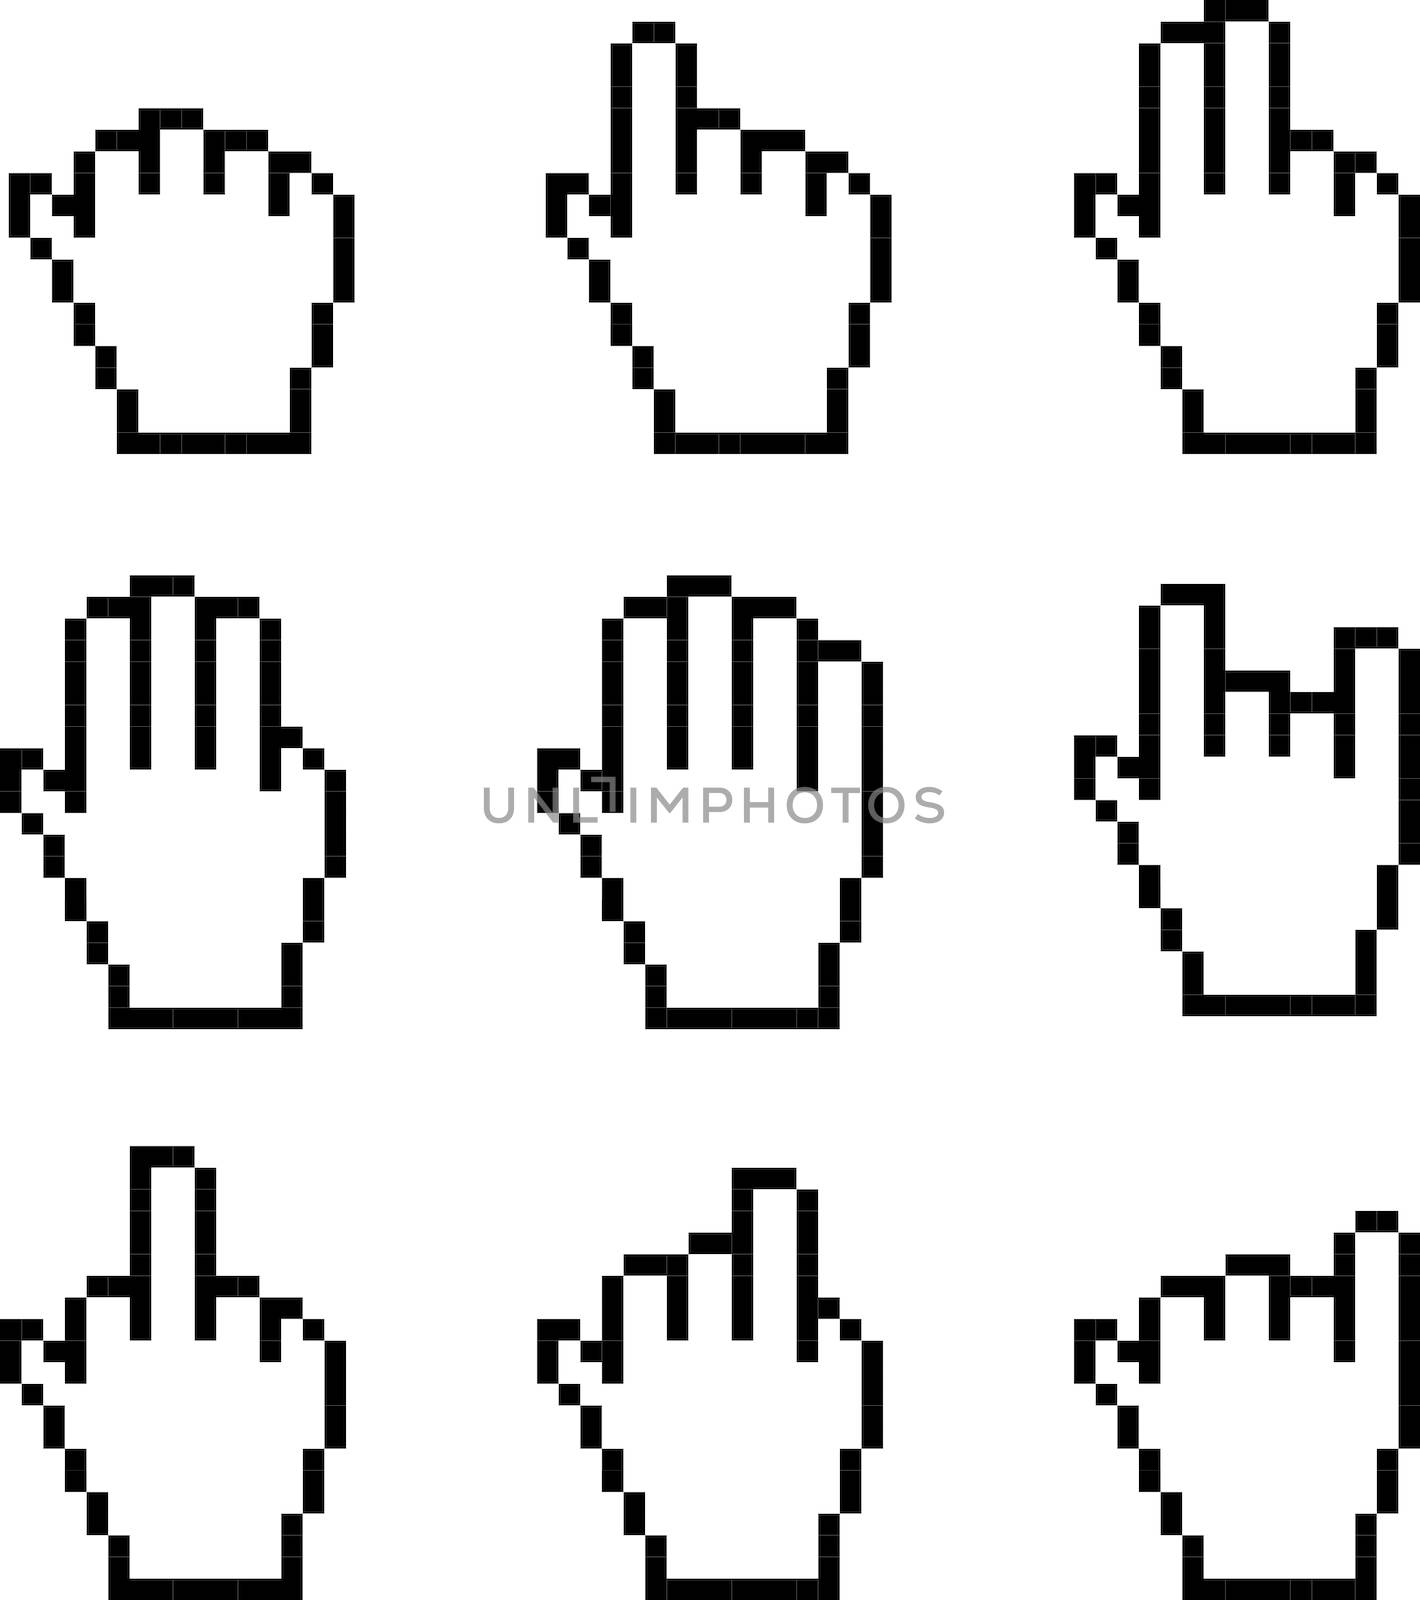 An Illustration of Pixelated Hand